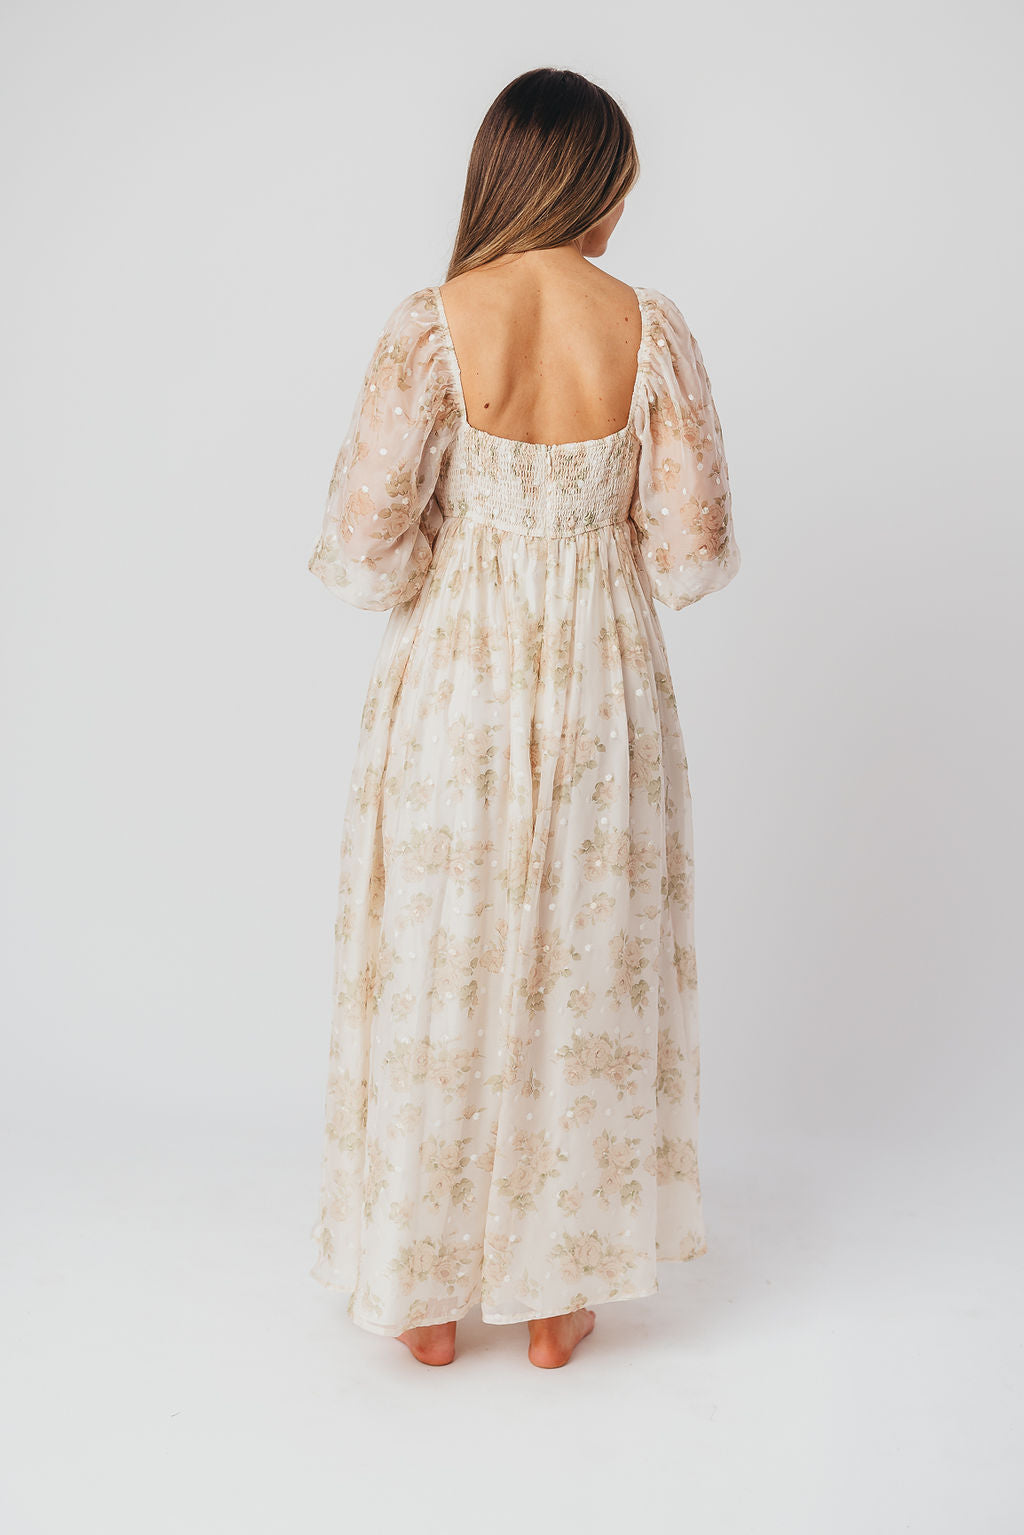 *New* Mona Maxi Dress with Smocking in Cream Floral - Bump Friendly & Inclusive Sizing (S-3XL)